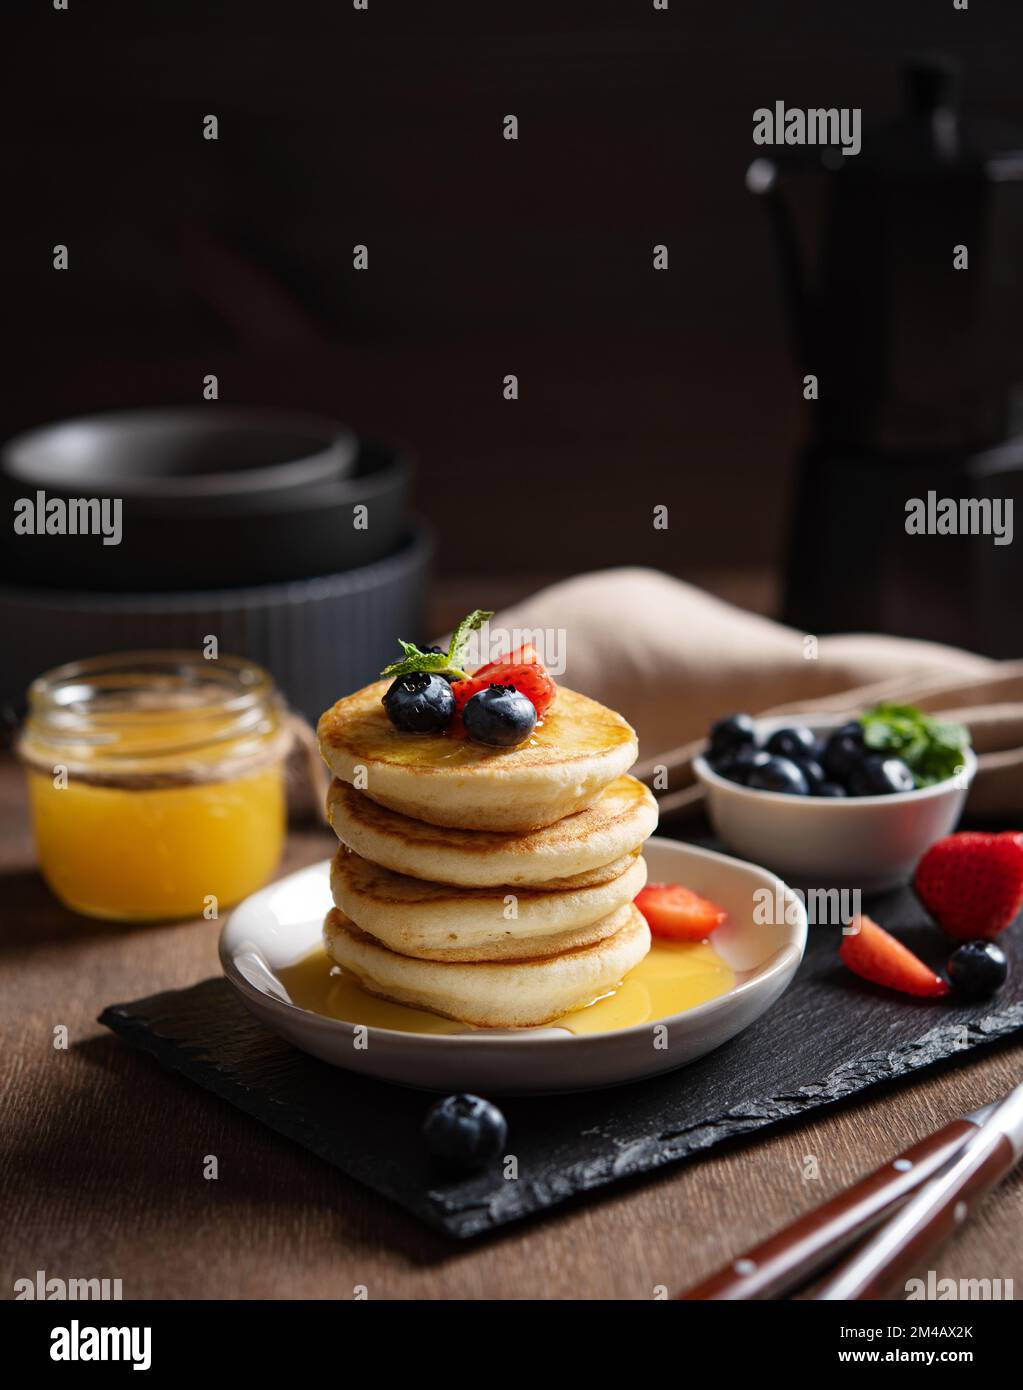 Delicious homemade pancakes with strawberries and blueberries and honey on a dark wooden background with coffee pot. The concept of a healthy and nutr Stock Photo